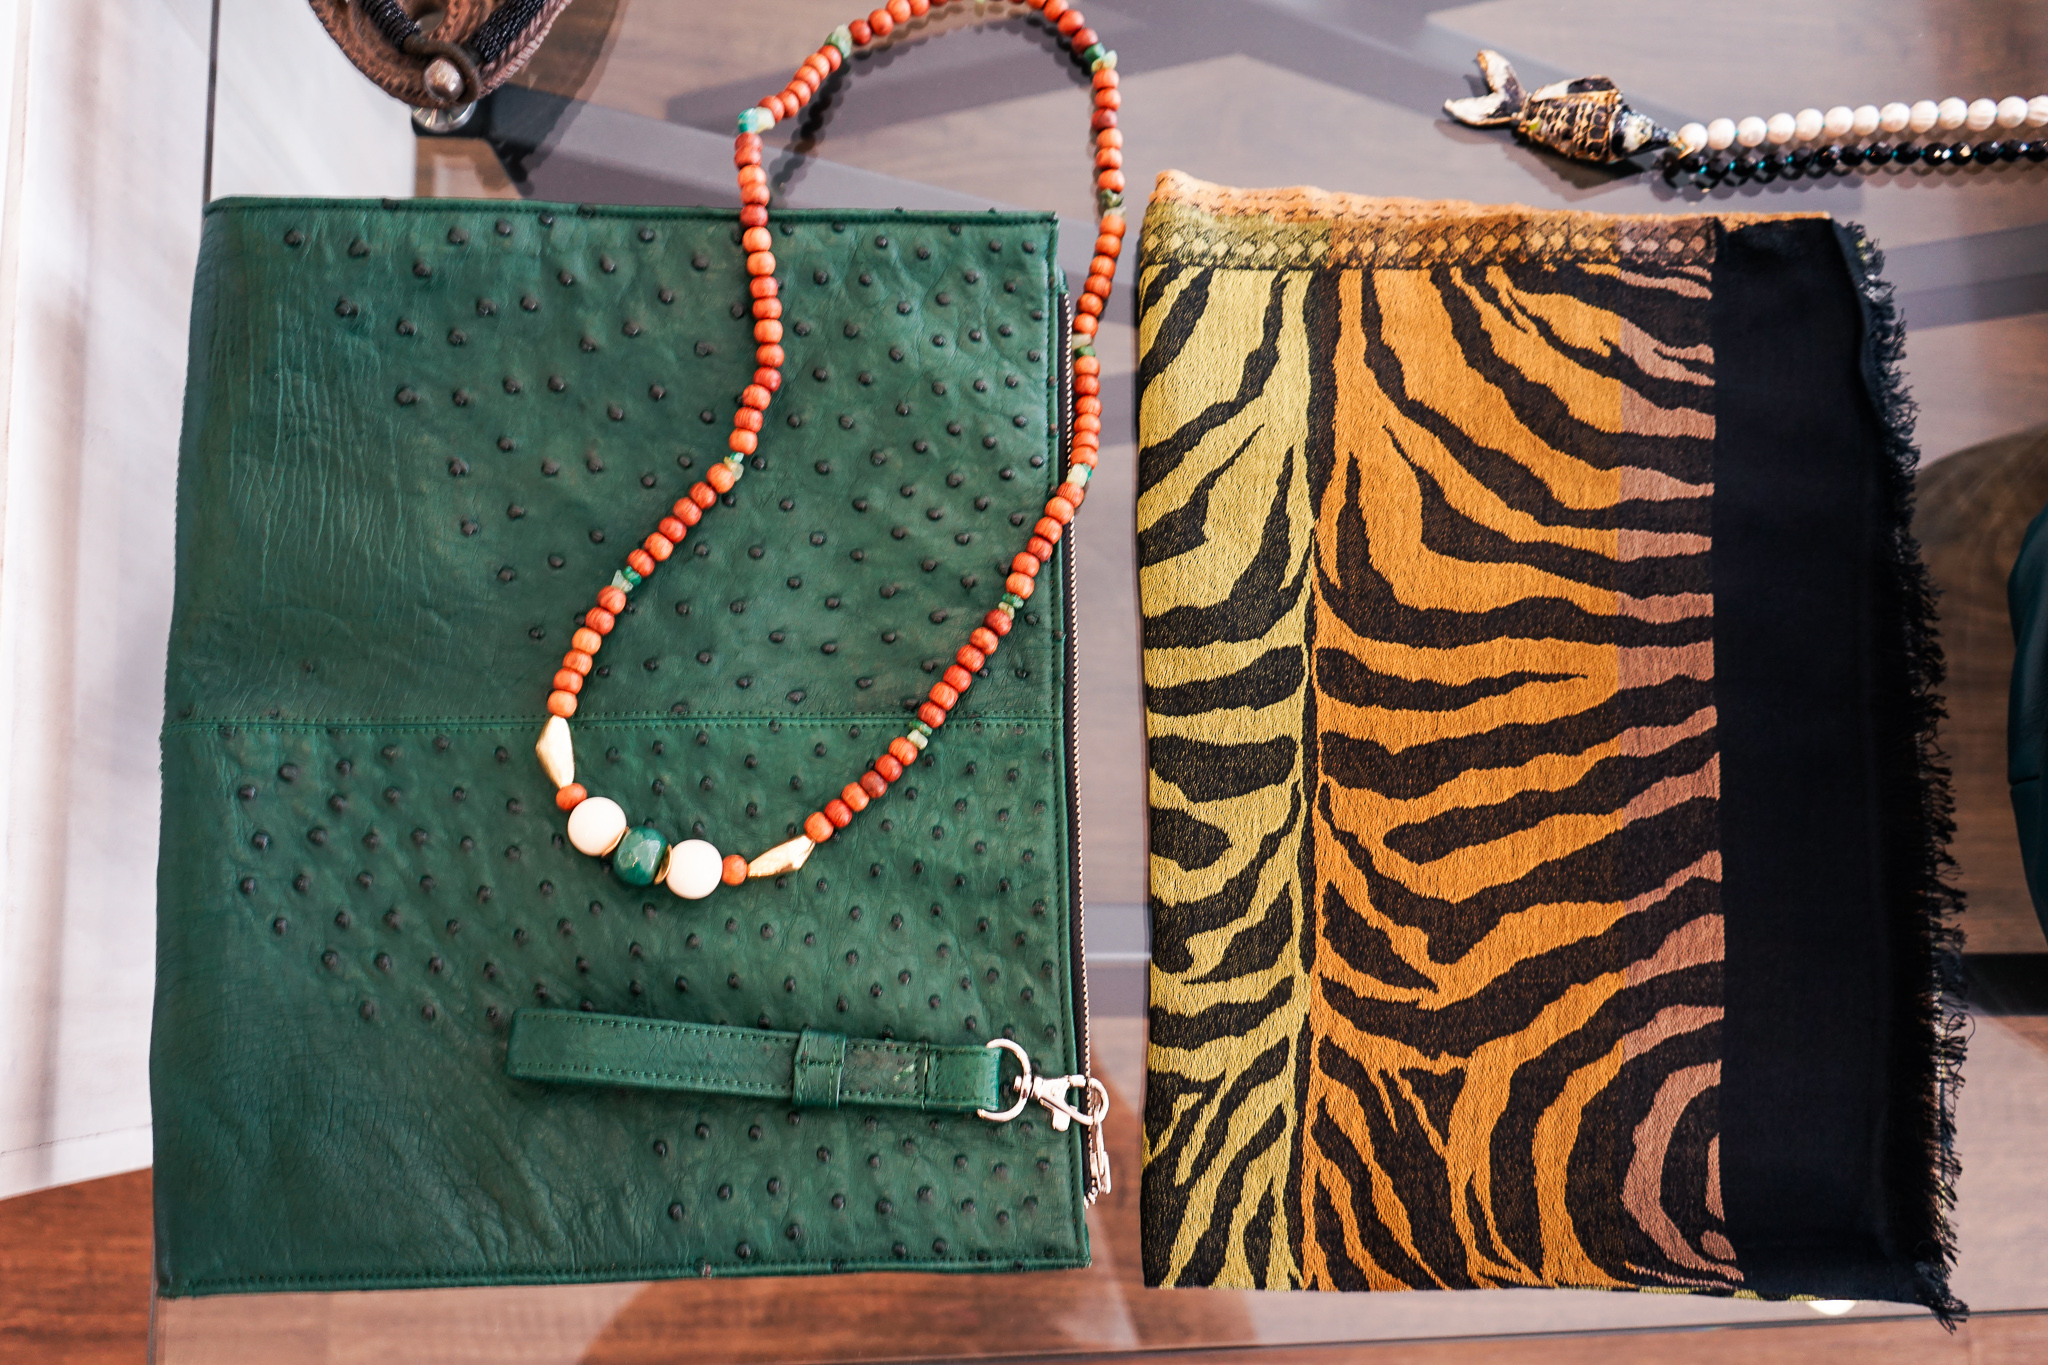 Ostrich leather clutches at L'Atelier Touche